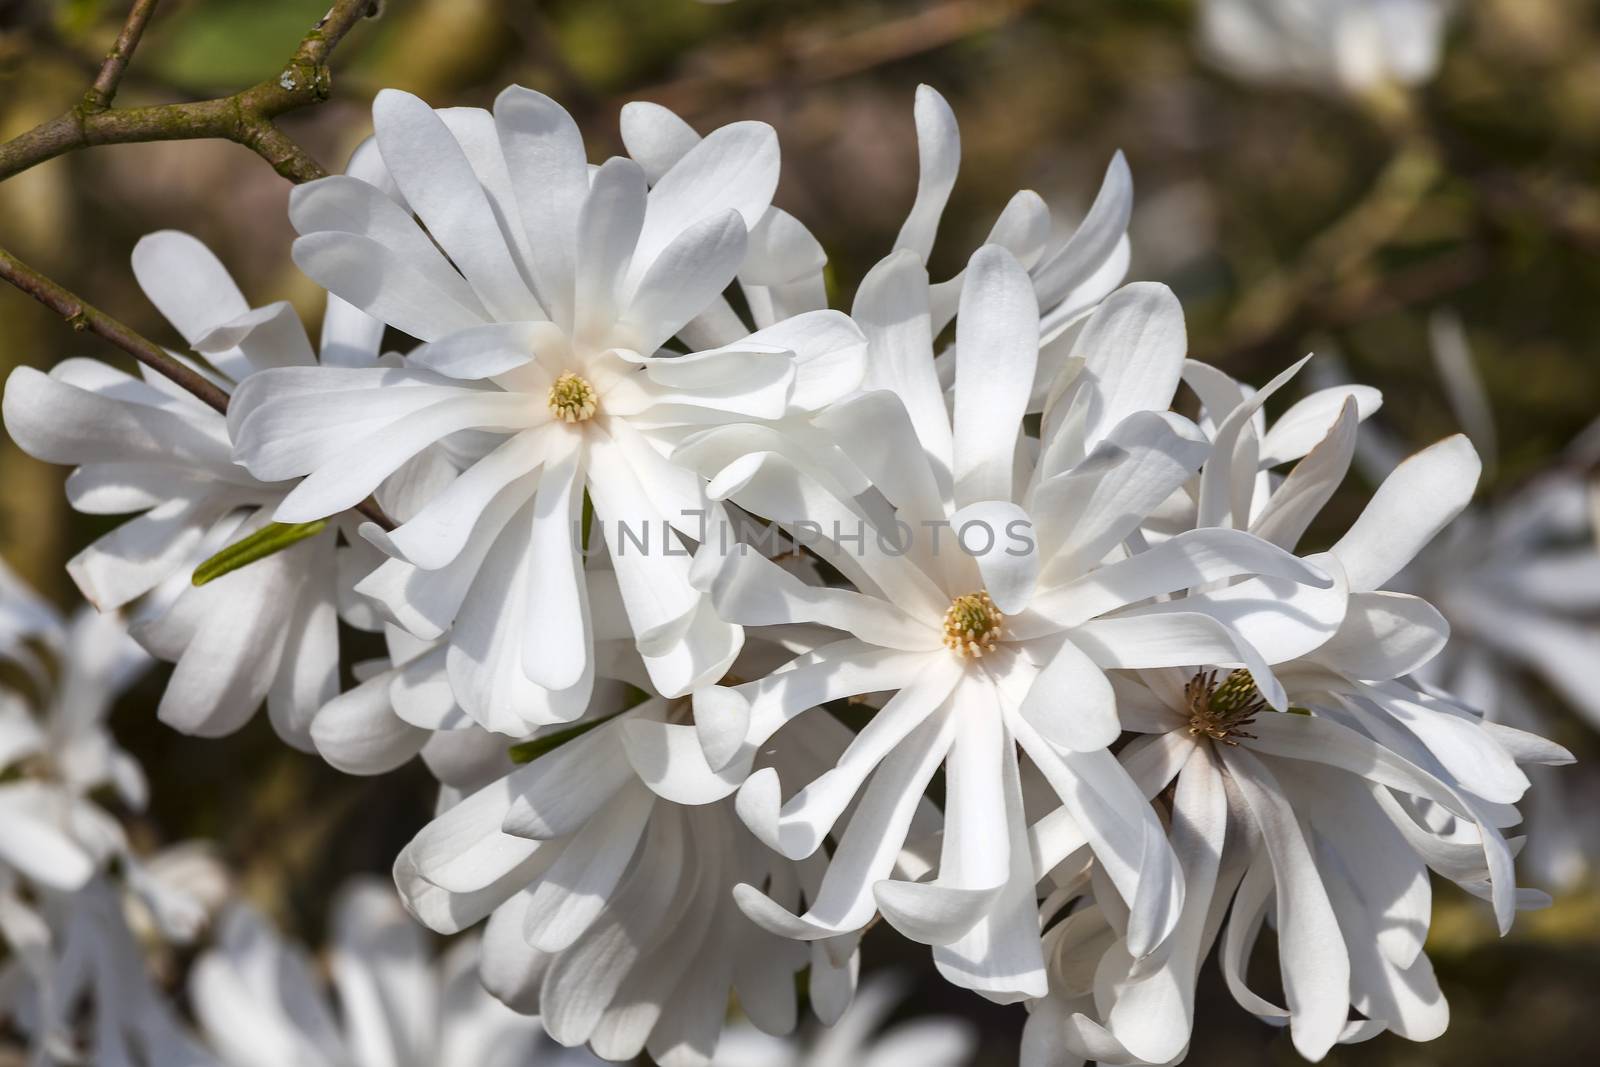 Magnolia Stellata a winter spring white flower shrub or small tree commonly known as star magnolia